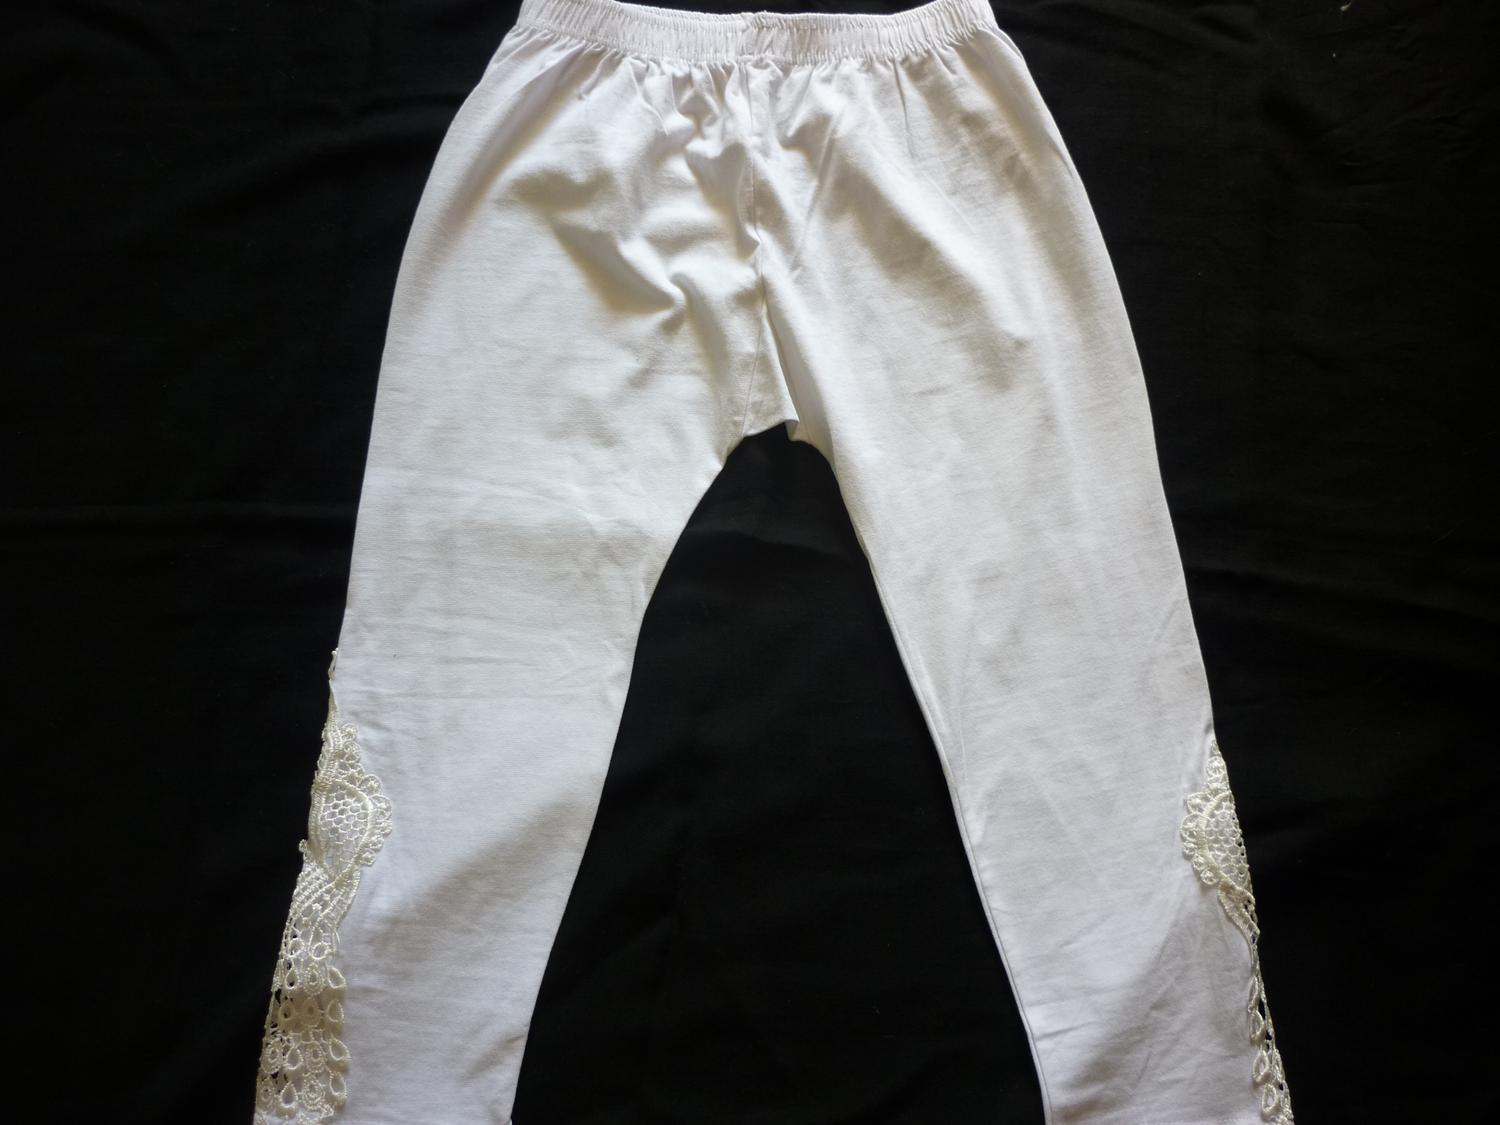 LEGGING FOR GIRLS-WHITE -LARGE-FREIGHT FREE-LOWEST PRICE GUARANTEED-TRY ATLEAST  ONCE- DO NOT MISS THIS CHANCE-50% DISCOUNT-ART.NO.10/34911564